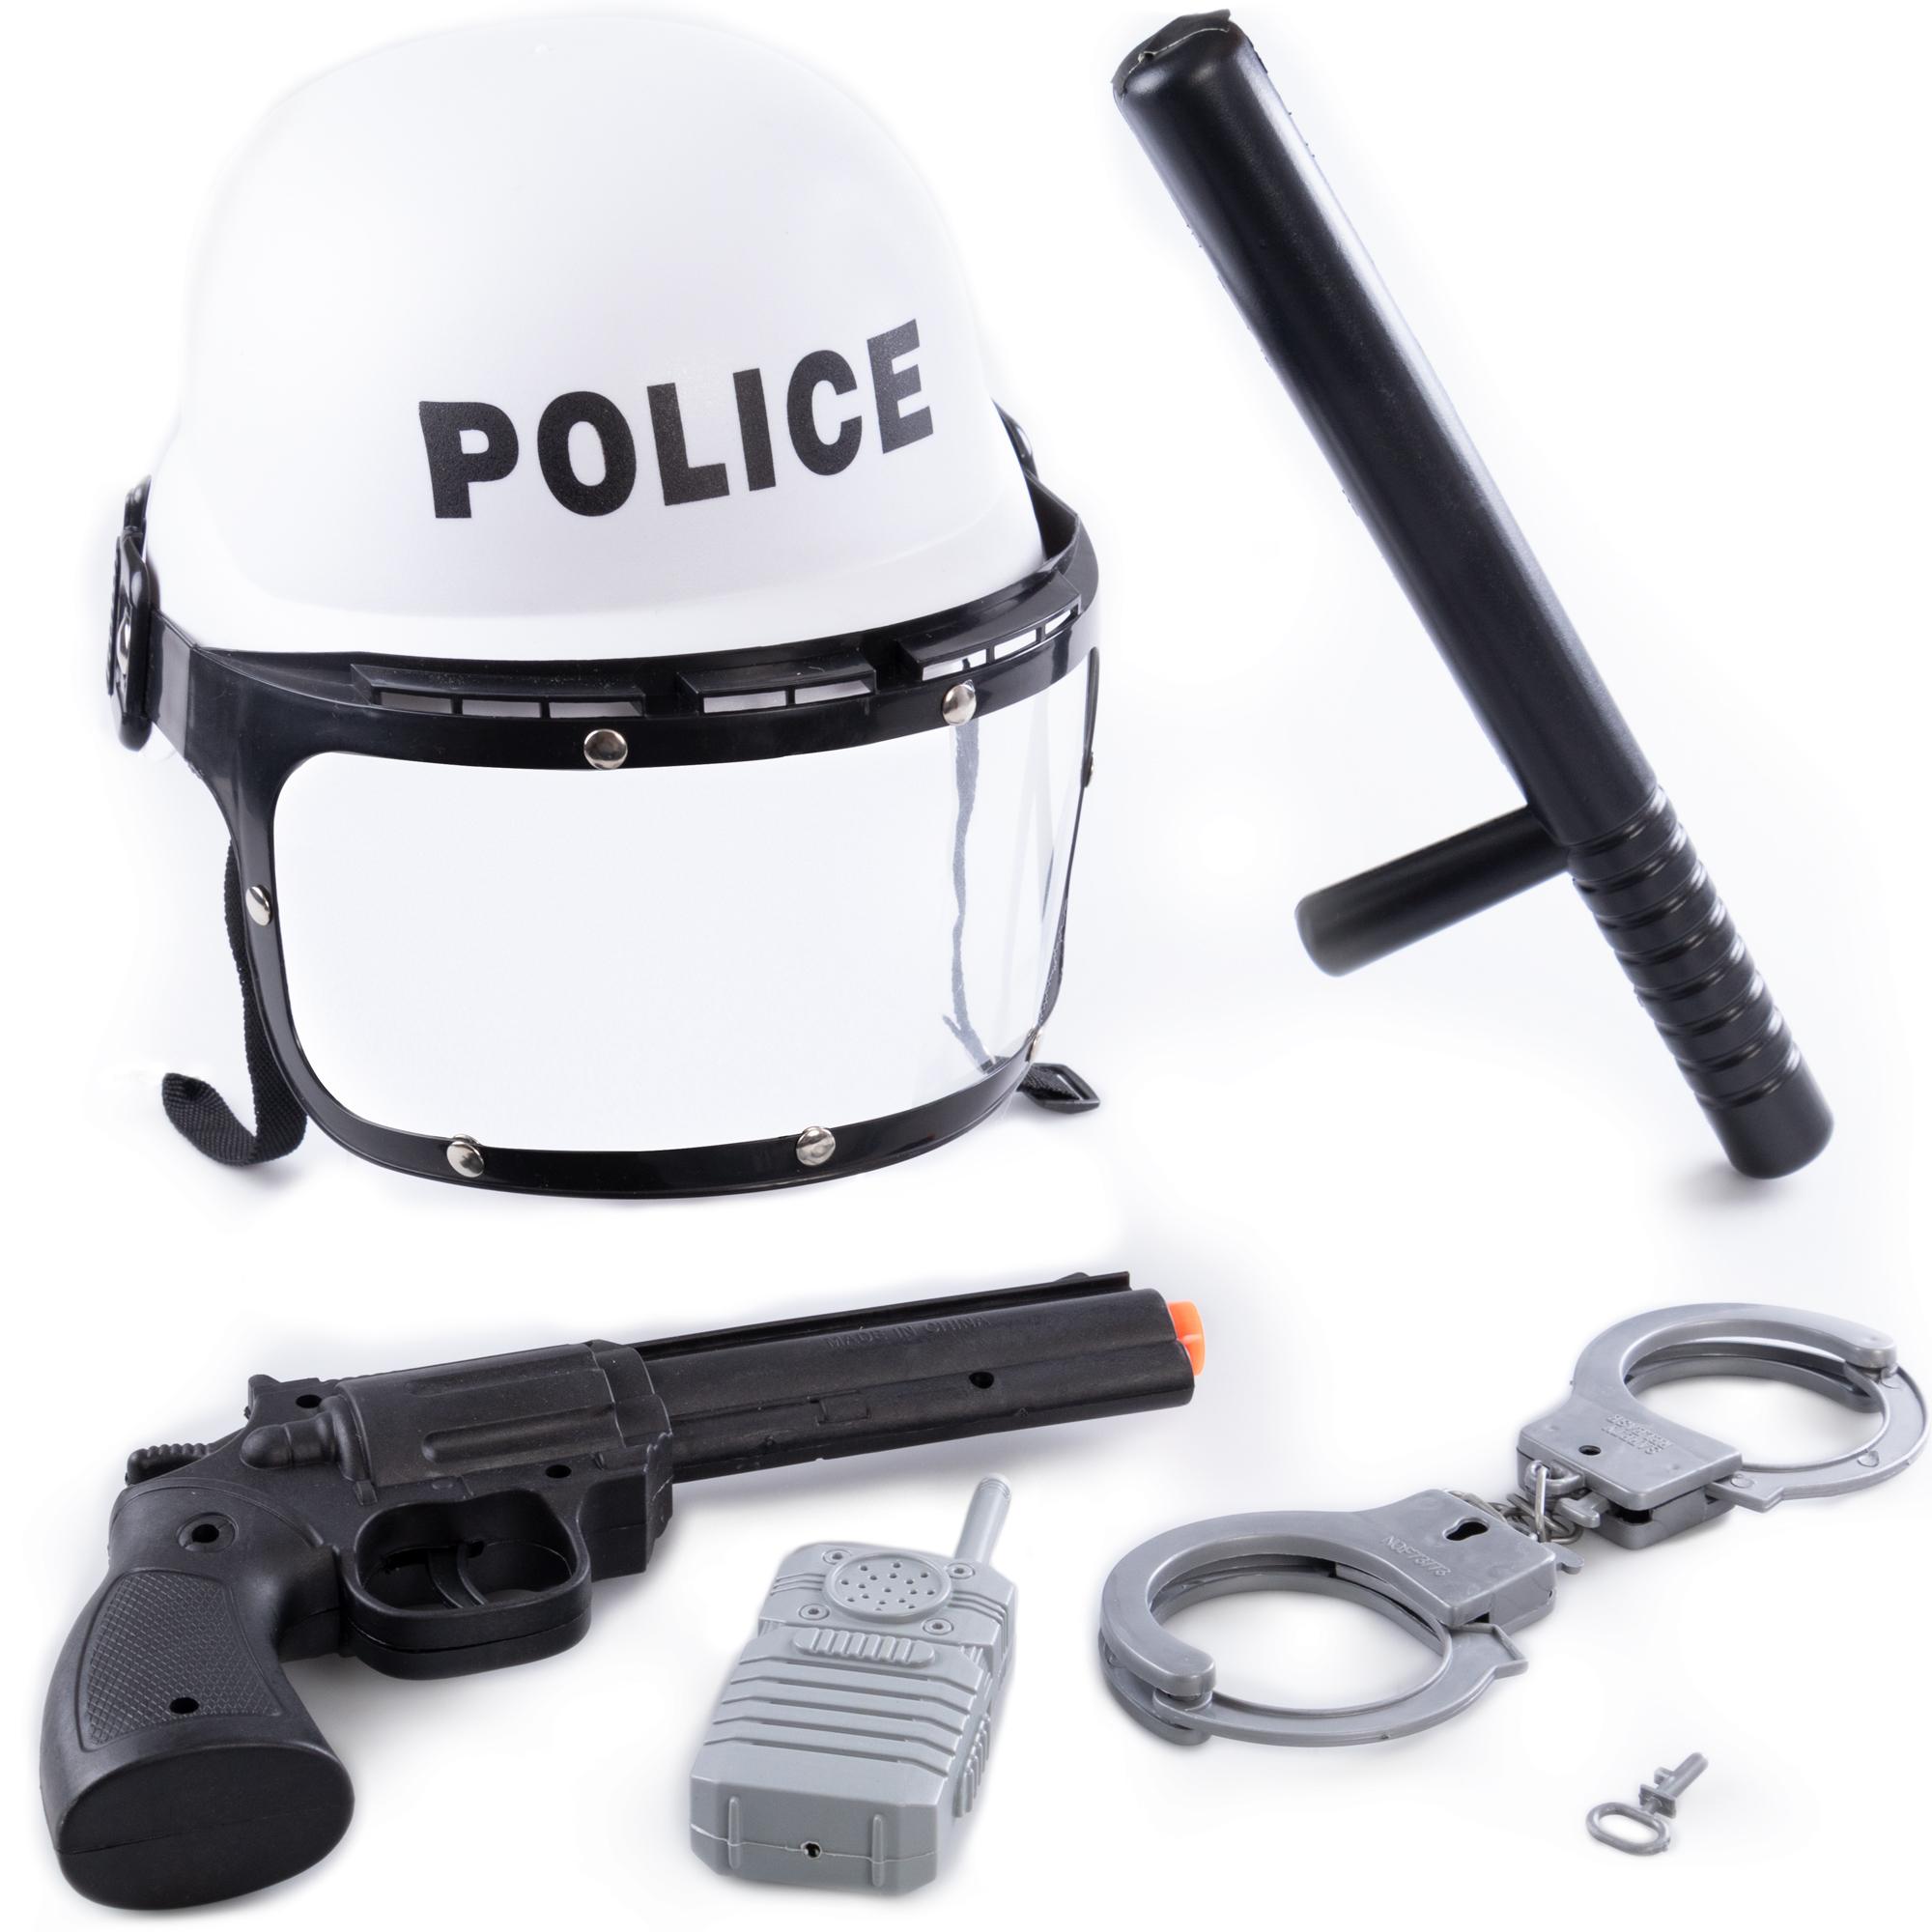 Proud Police Accessory Kit